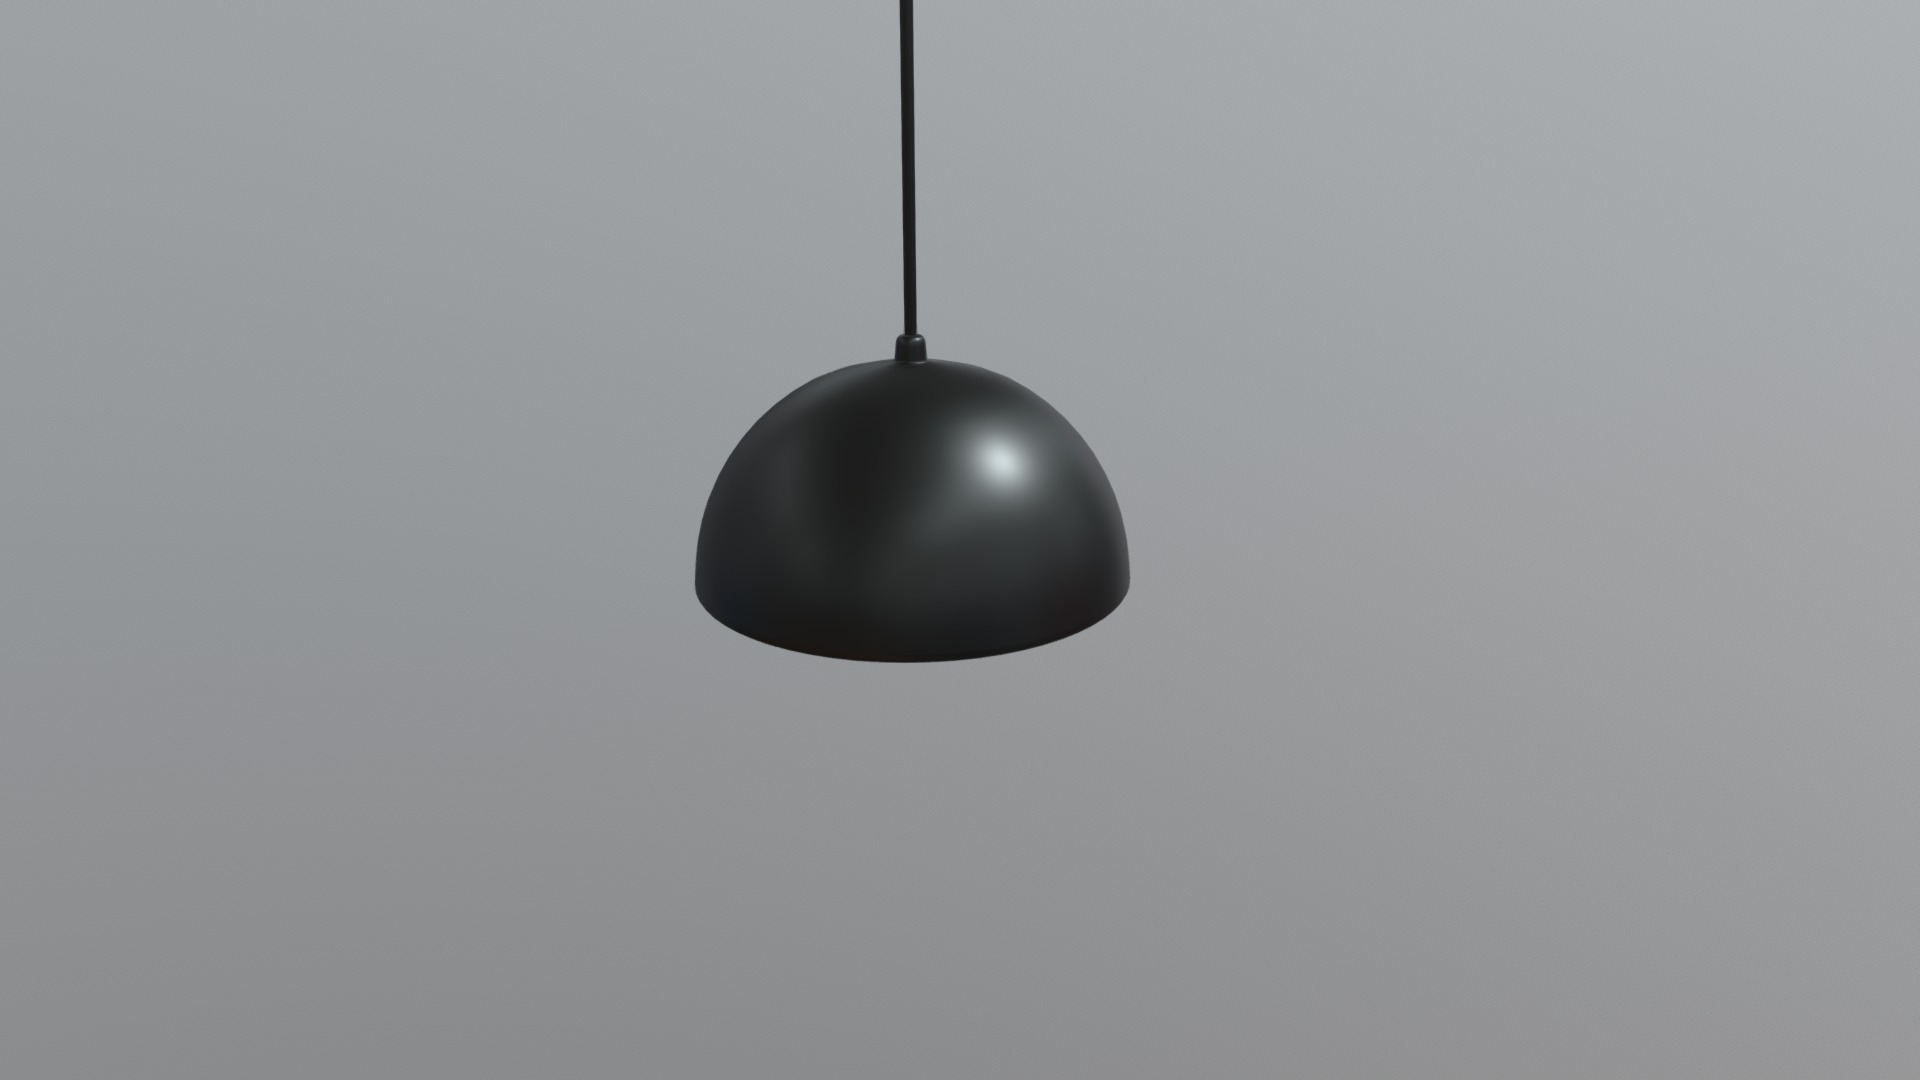 Hanging lamp that was created using Blender. This is a hanging lamp that goes above the tables in restaurants or any other areas that need to be lit up. There is the lamp itself and an LED light bulb included. Both objects use the metalness workflow and are PBR ready.

Features:


Uses metalness workflow
Includes 2 different objects
Includes 13 PBR textures 2048x2048 in PNG format
Textures can be edited in any photo editing software
Models have been unwrapped with matching textures to its UVMap
Models are exported in 4 file formats (FBX, OBJ, 3DS, DAE/Collada)
Native blend file also included
Model is included in my “Restaurant Asset Pack” https://skfb.ly/6AHPV

Included Textures:


AO, Diffuse, DiffuseAlpha, OpacityTransmission, Roughness, Gloss, Metallic
UVLayout

The source file that is uploaded is for demonstration use and is uploaded in FBX format. In the additional file you will find all model exports and the textures that go along with them 3d model